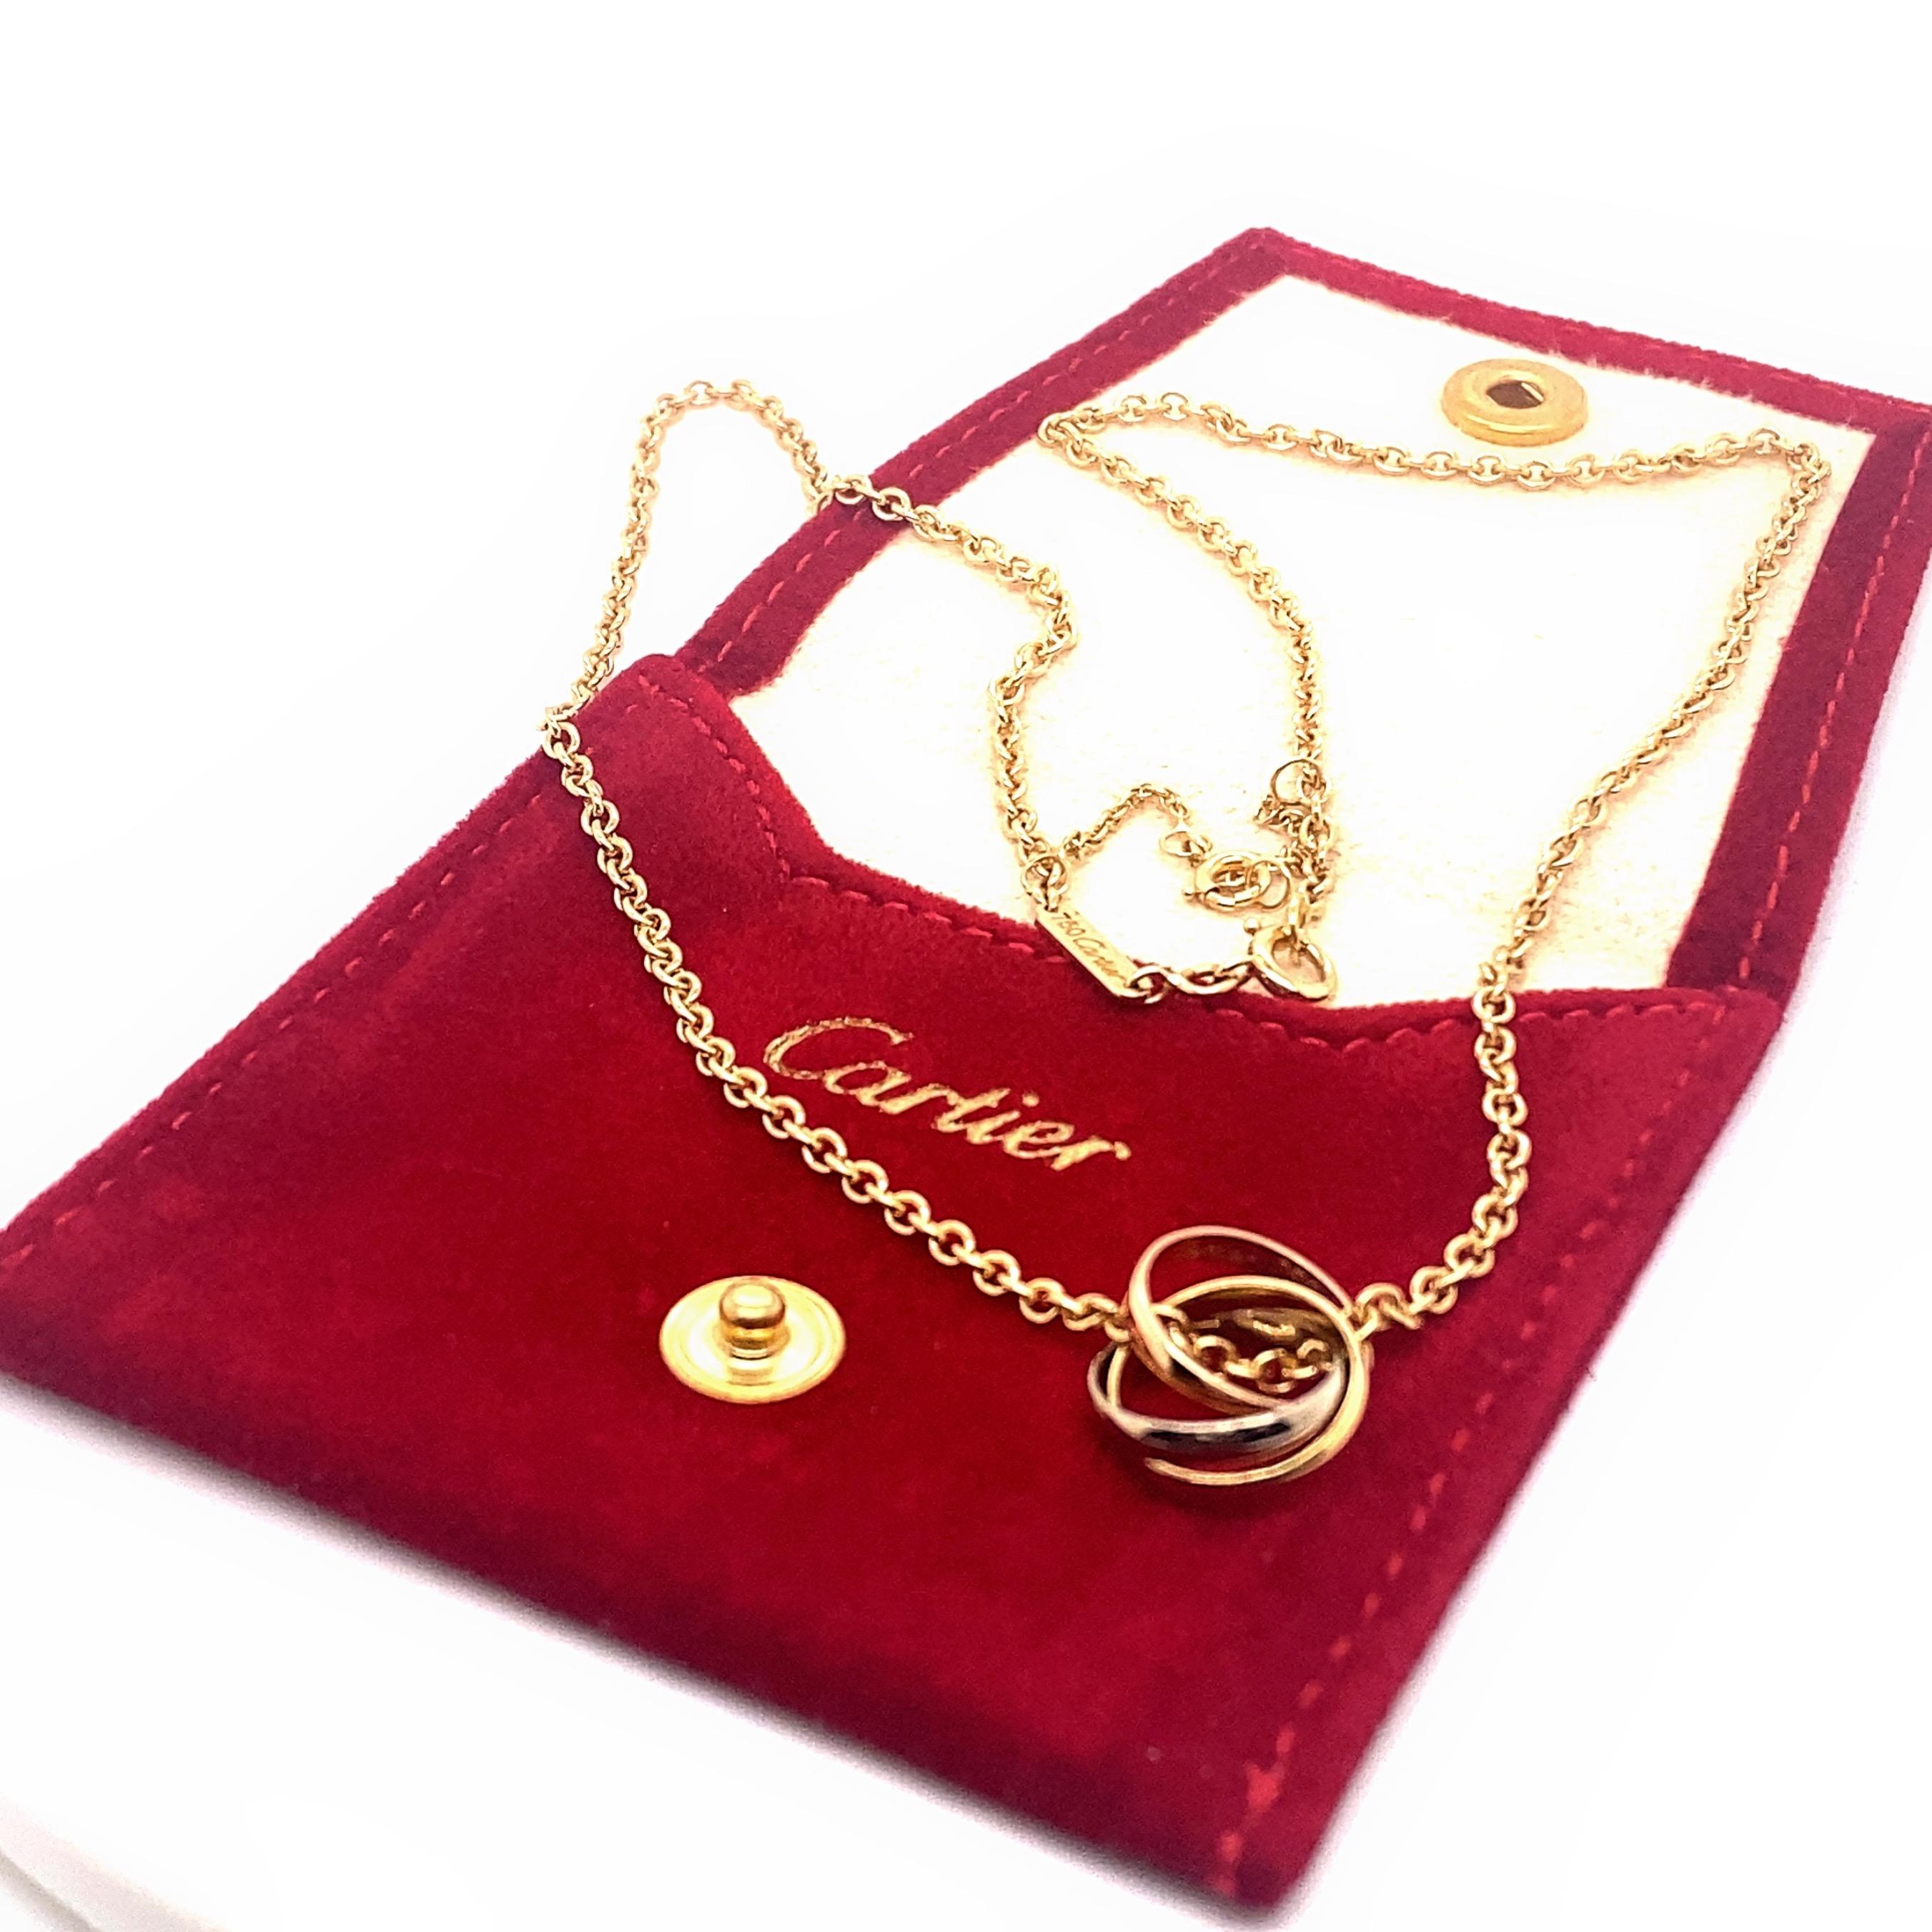 Cartier Trinity Necklace
Style:  Tri-Color Gold Interlocking Rings
Ref. number:  B7224574
Metal:  18kt White Gold Rose Gold
Serial:  GK8***
Size:  16' inches 18kt Rose Gold Chain
Hallmark:  